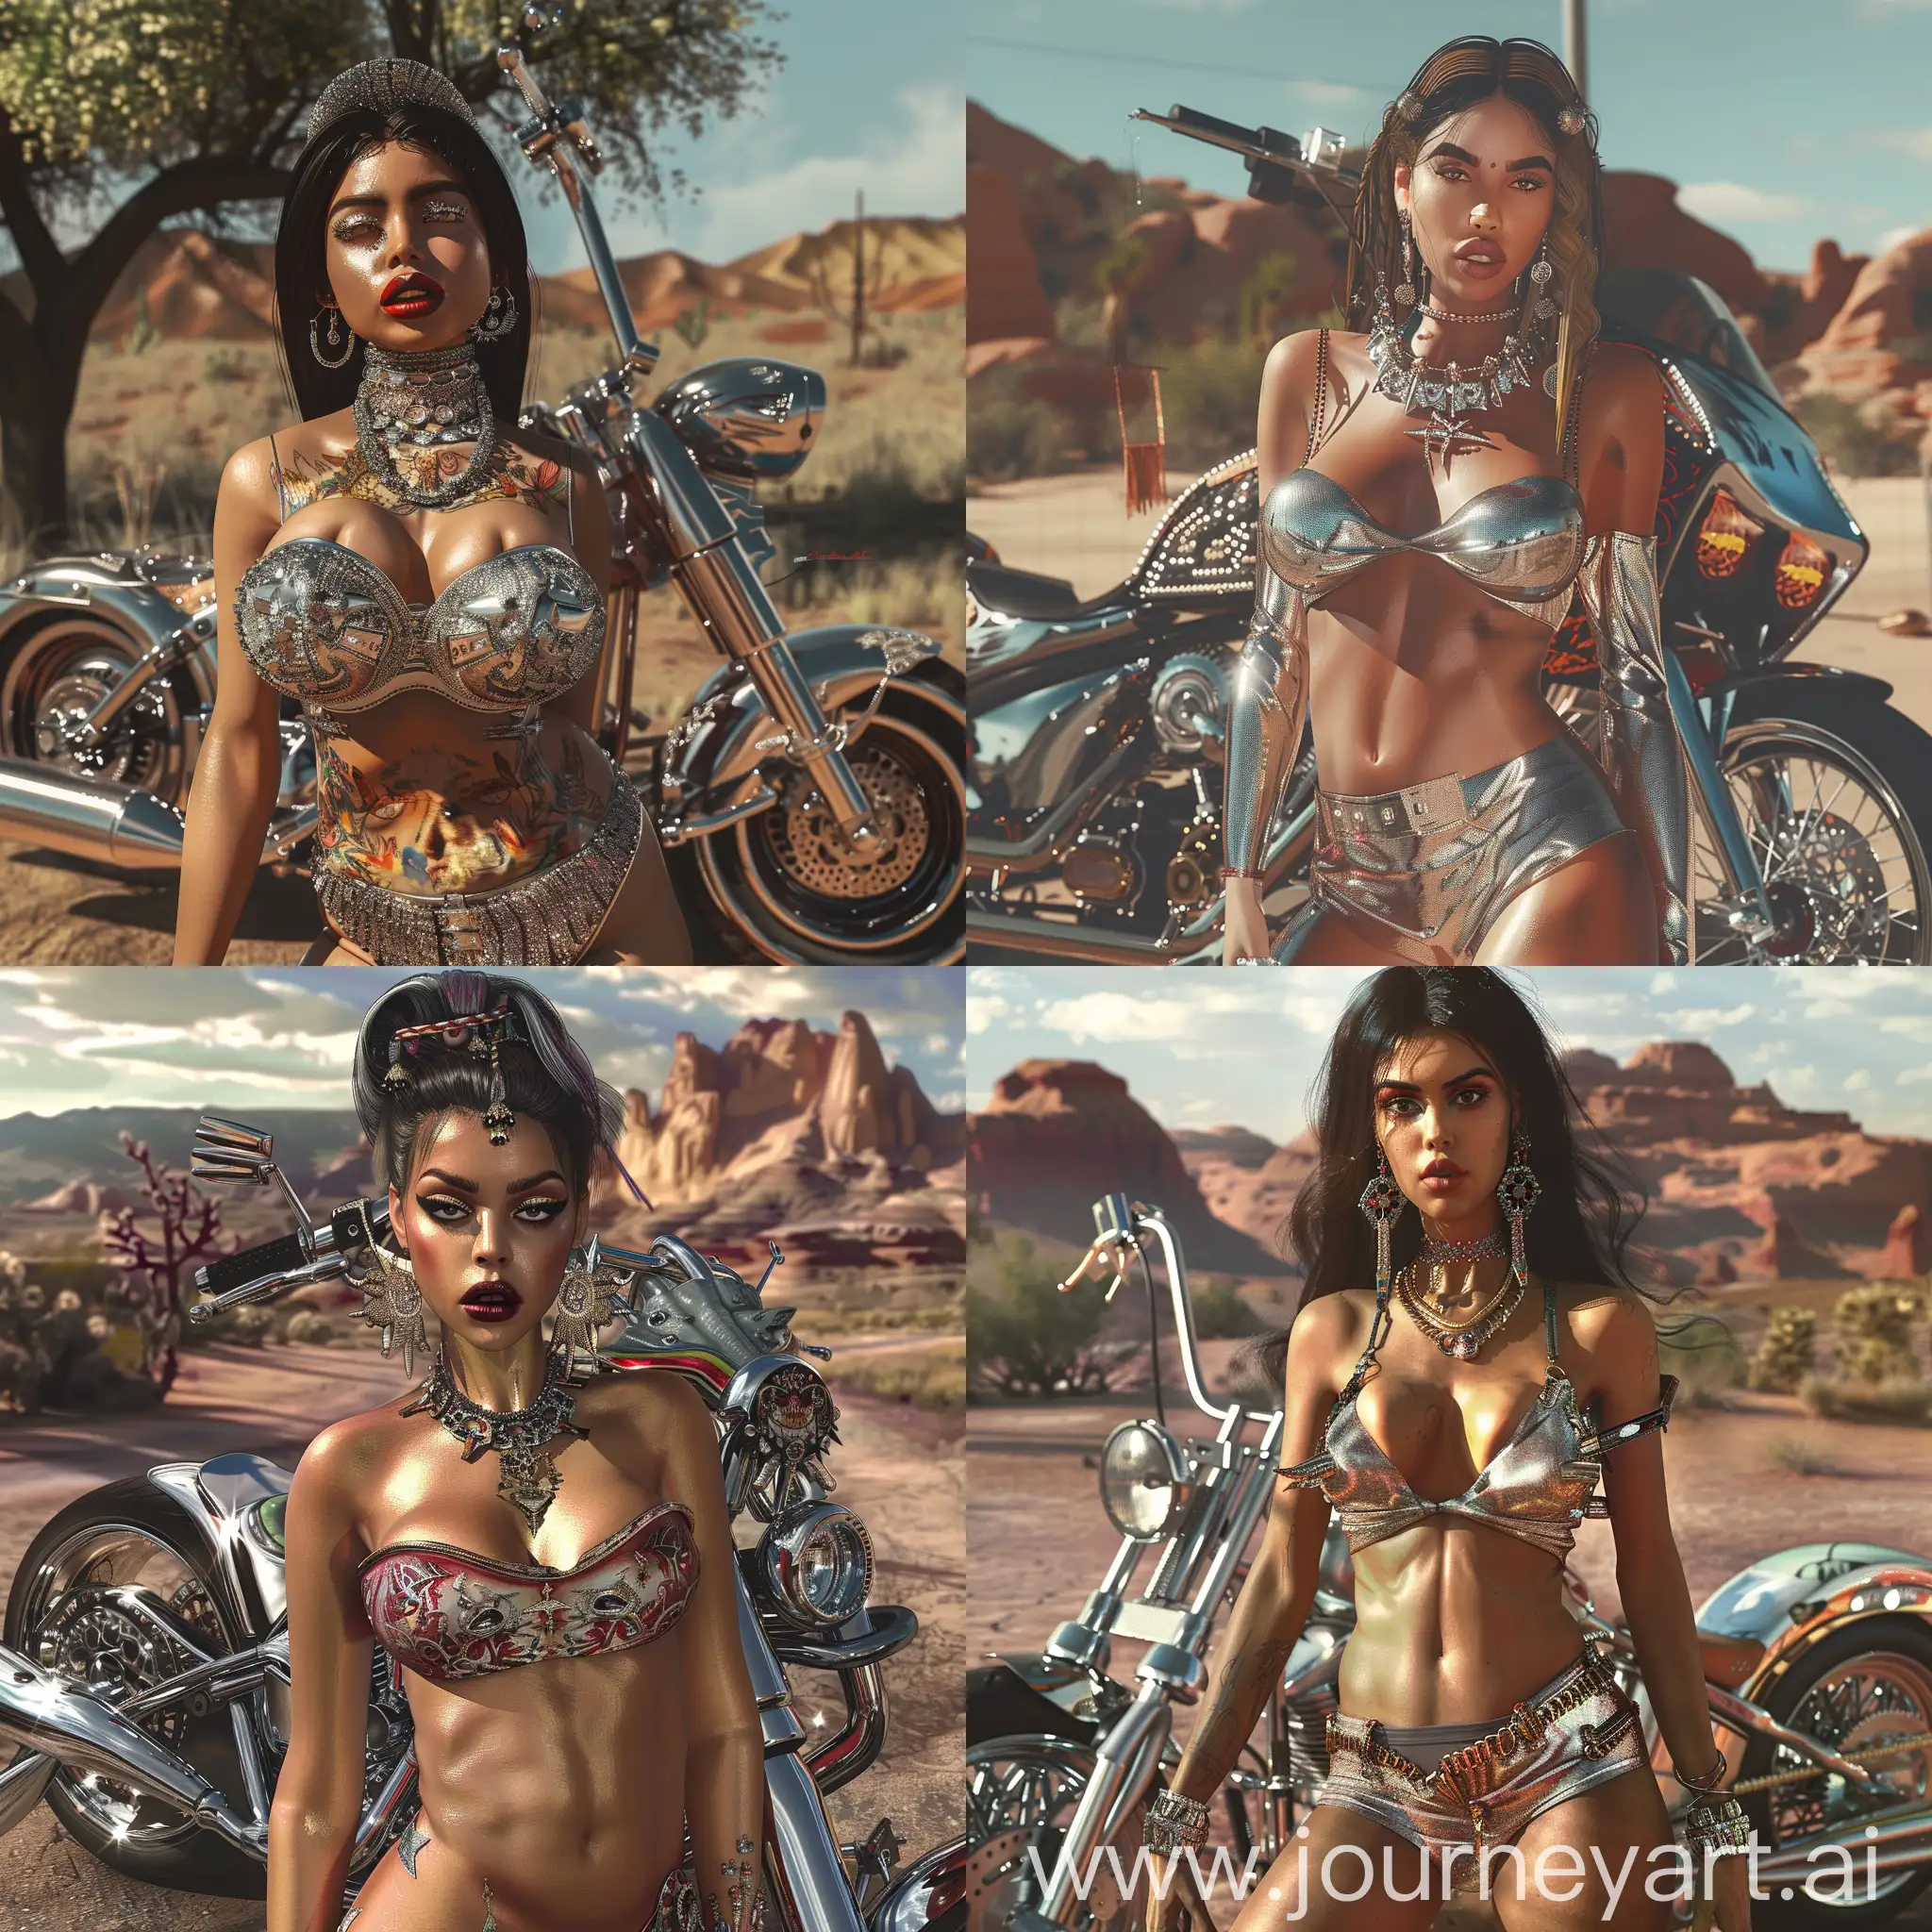 "Generate a COLORFUL, photorealistic image of a beautiful, revealing, Latina biker. She is standing in front of a custom, extravagant chrome-enhanced, lowrider, chopper. Her attire hugs her figure, emphasizing her female form.  She is Adorned with jewelry that enhances her extreme statement. Her makeup is expertly done, with smoky eyes and a bold lip, enhancing her natural beauty. She is surrounded by a backdrop of a scenic desert, landscape.
The overall scene should capture the essence of freedom, adventure, and feminine power, portraying the LATINA chic as a symbol of strength and extreme beauty." 
